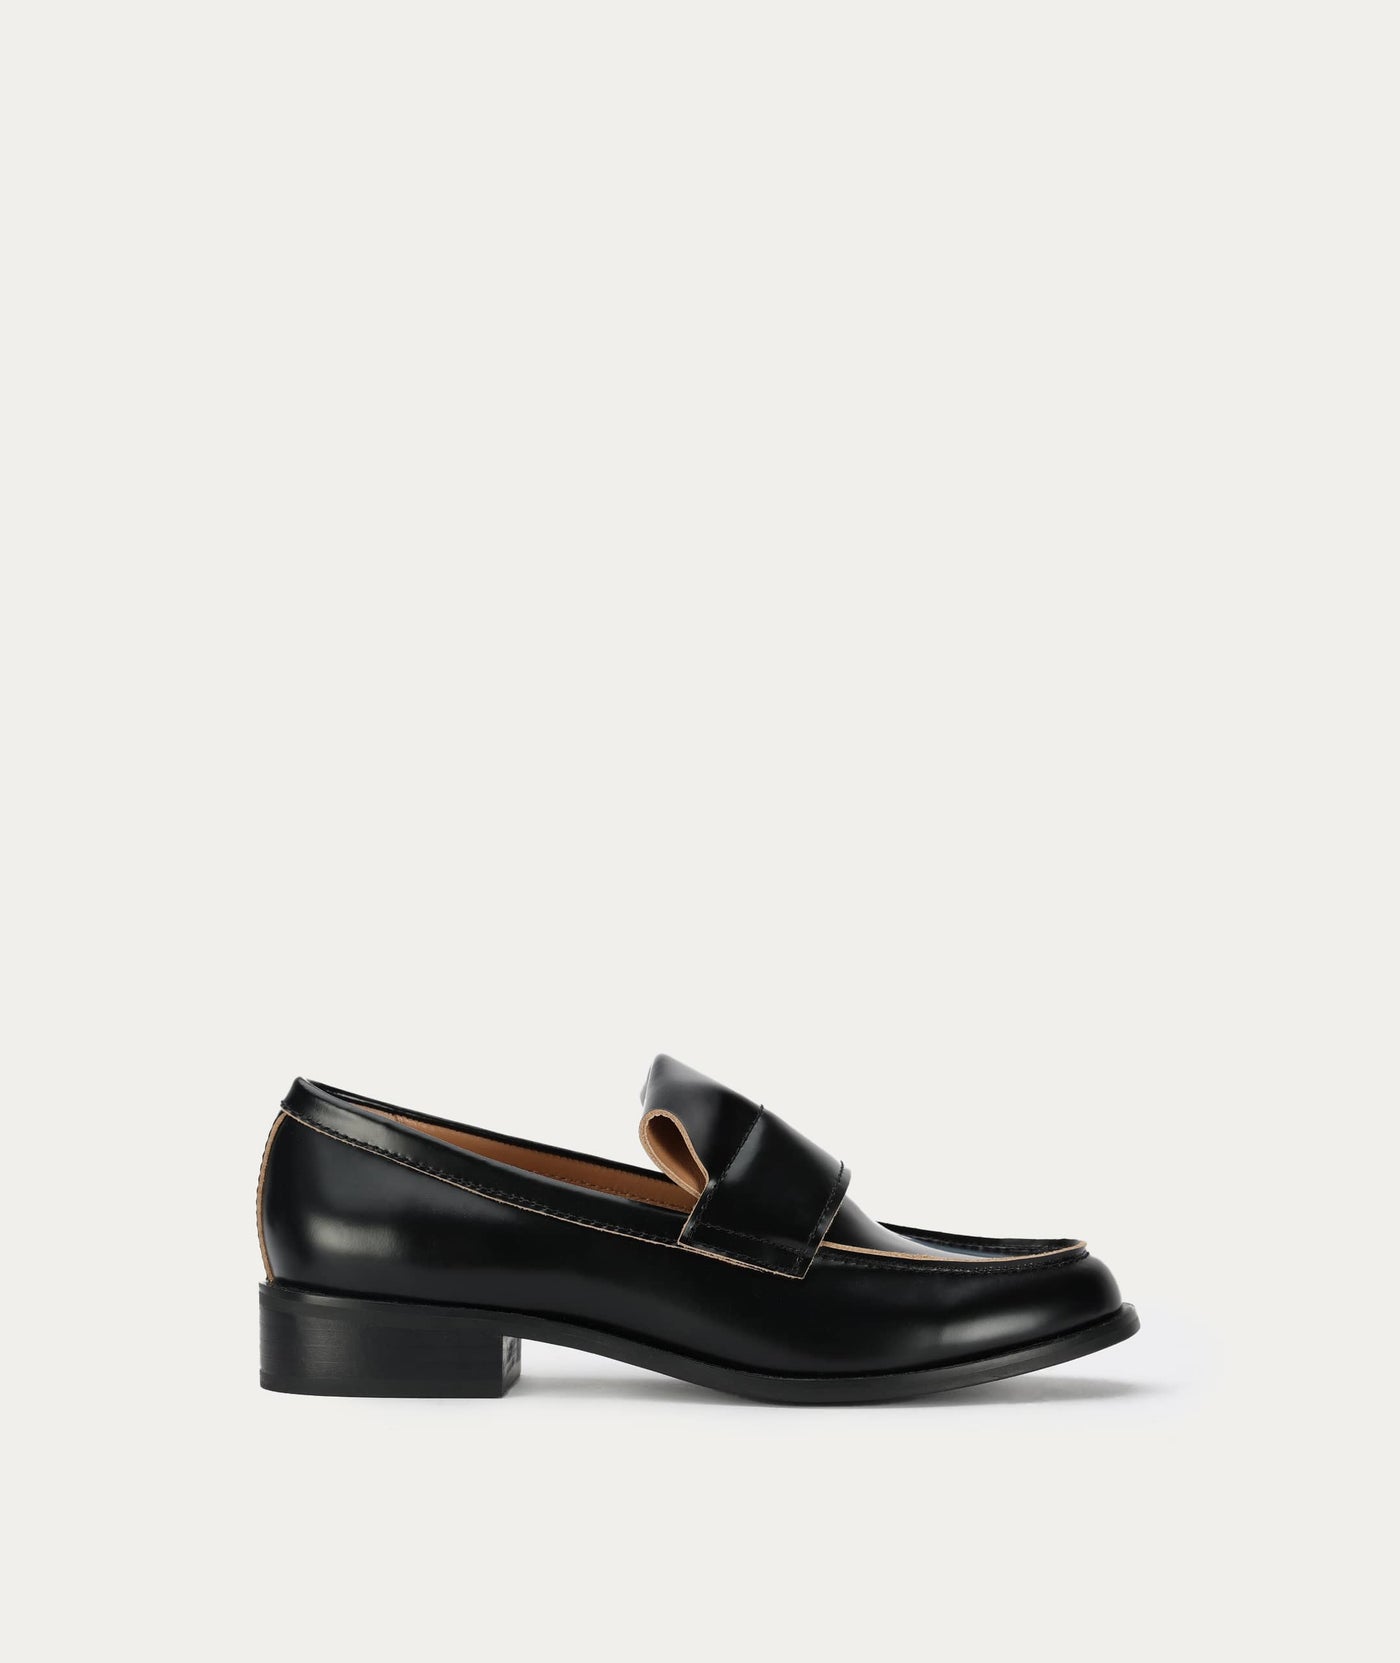 Cheval Loafer